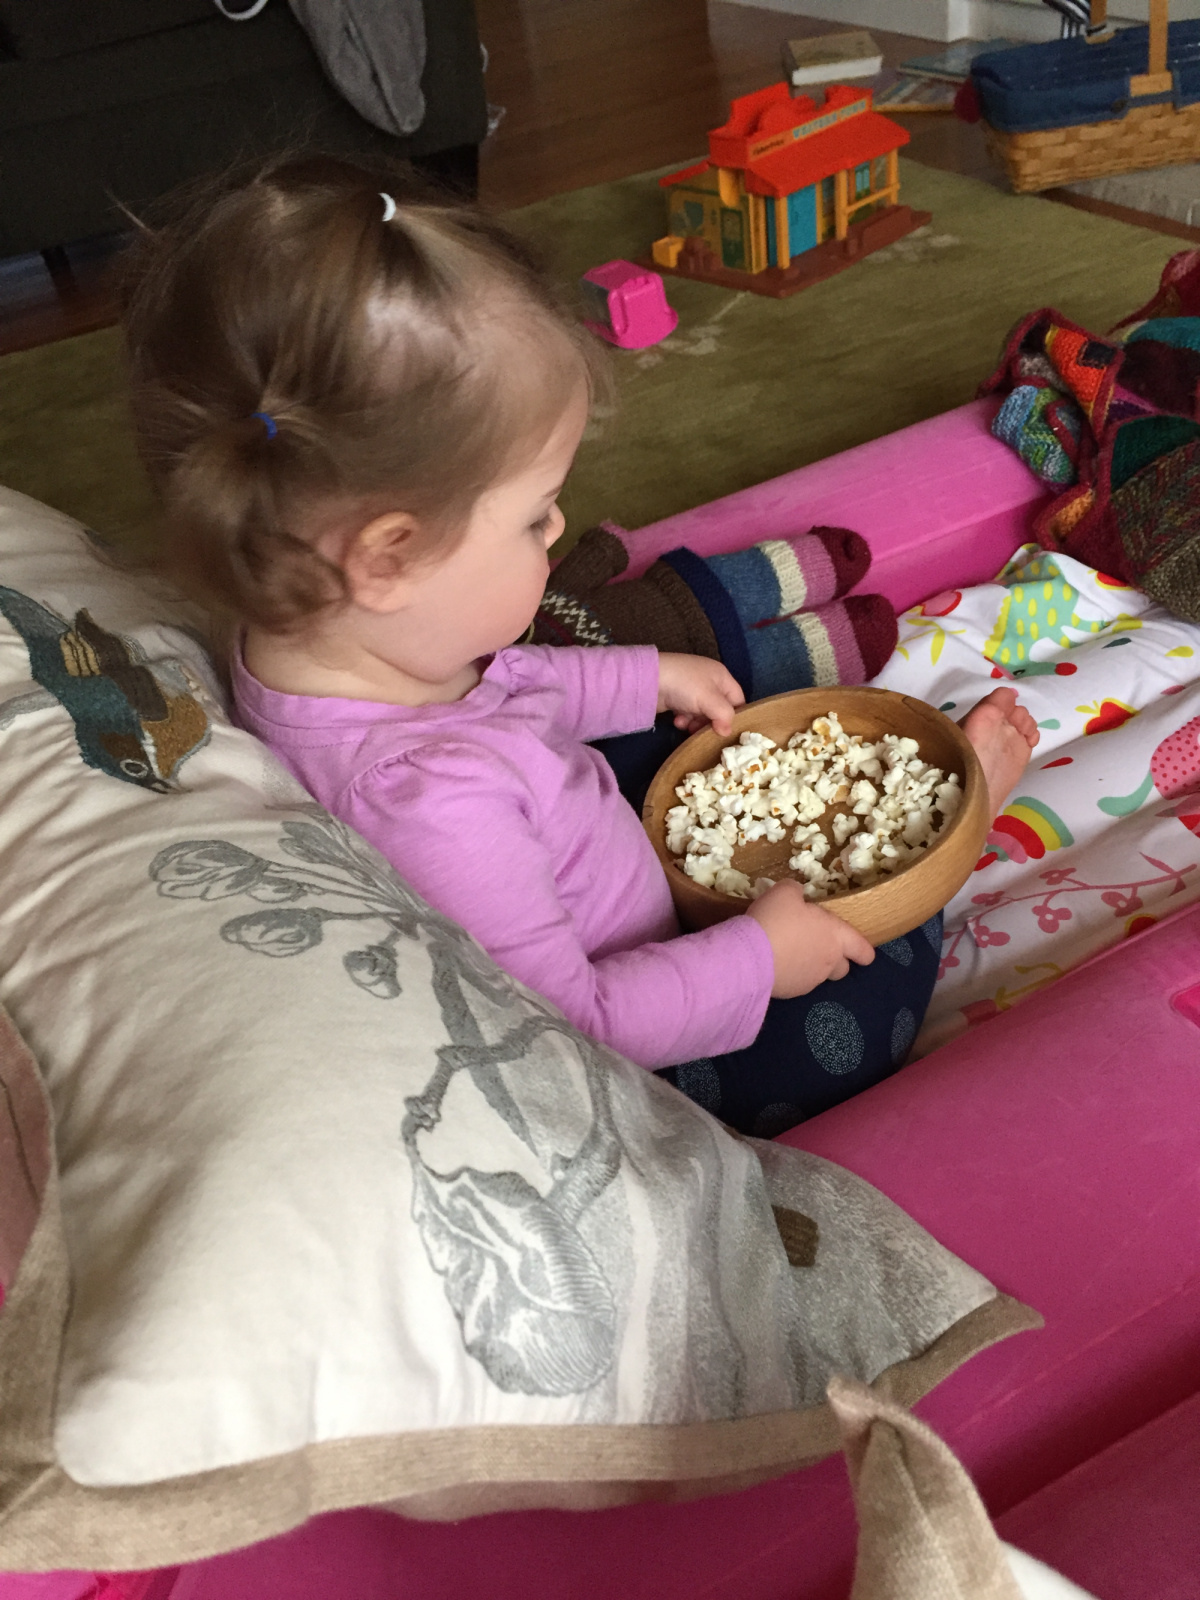 Movie and Popcorn for Maeve. She didn't last too long with the movie but made her own fun anyway.